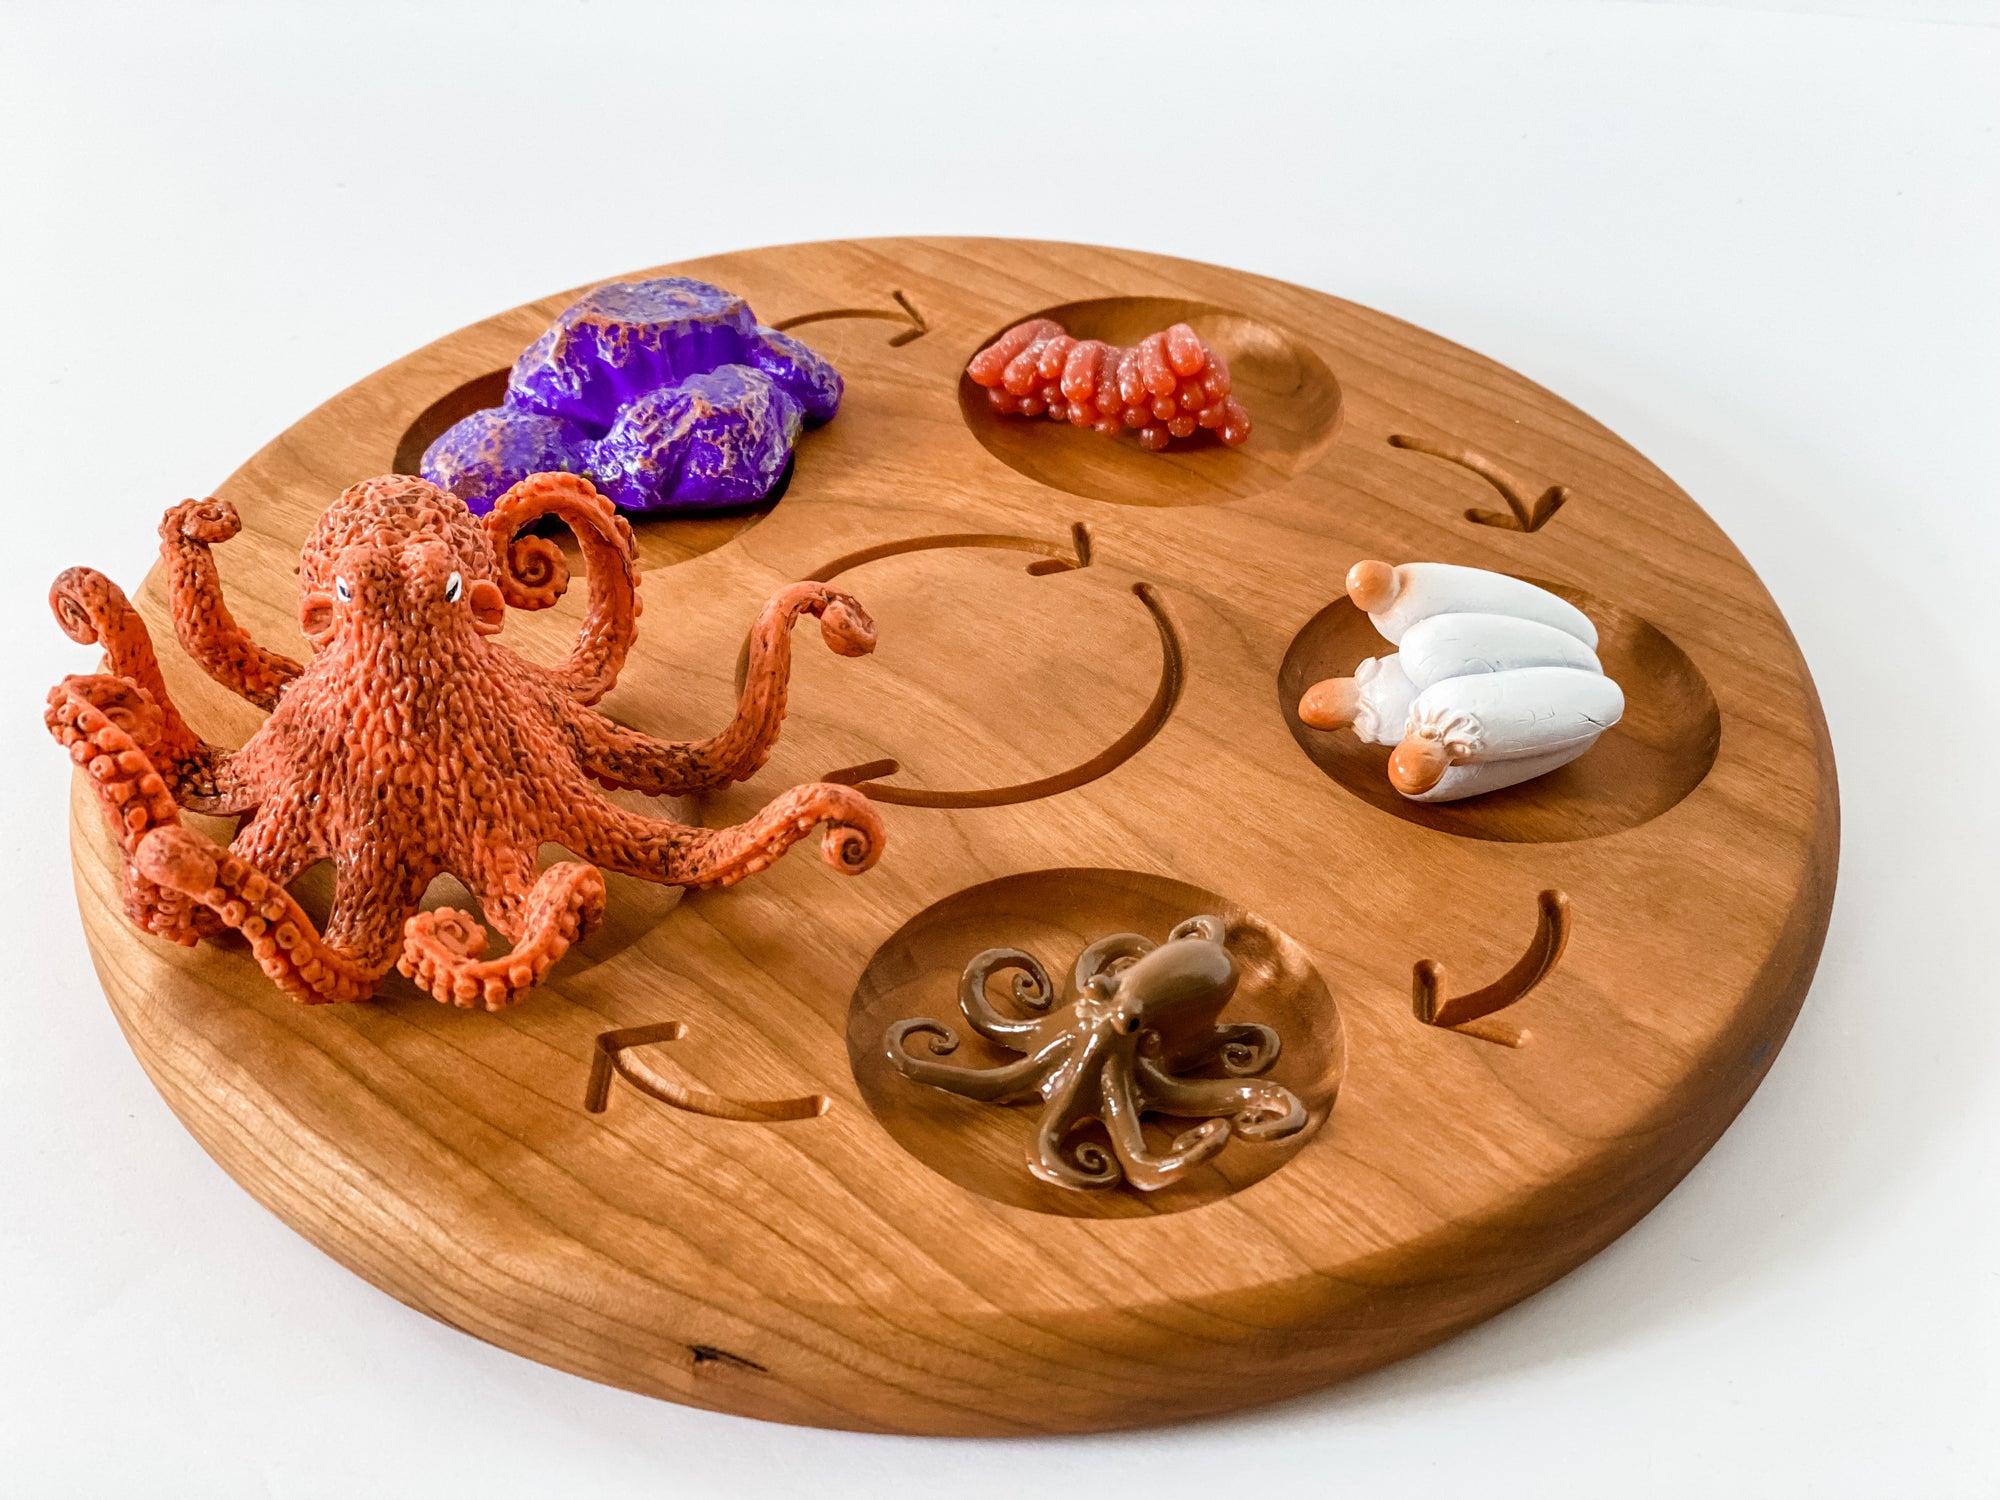 Octopus Life Cycle Figurines